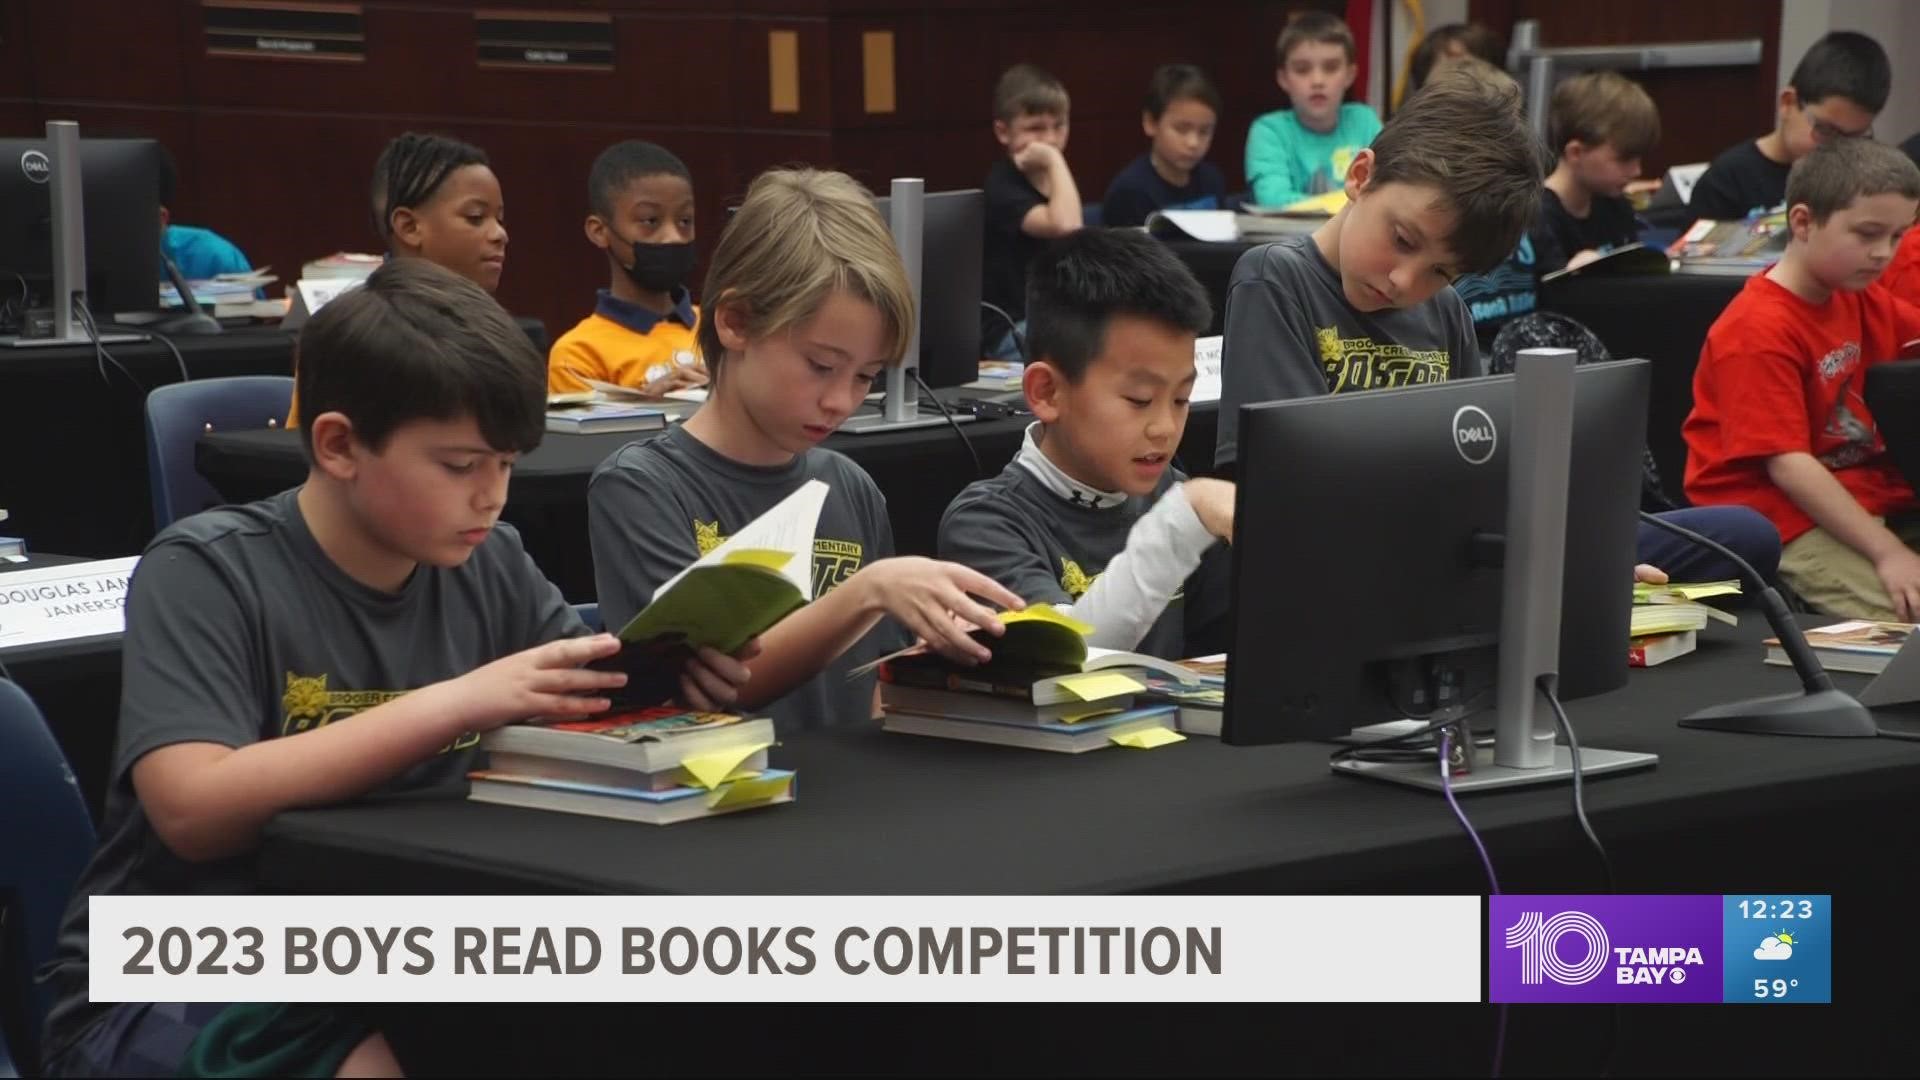 Kids from Pinellas County were quizzed on four books they were assigned to read.